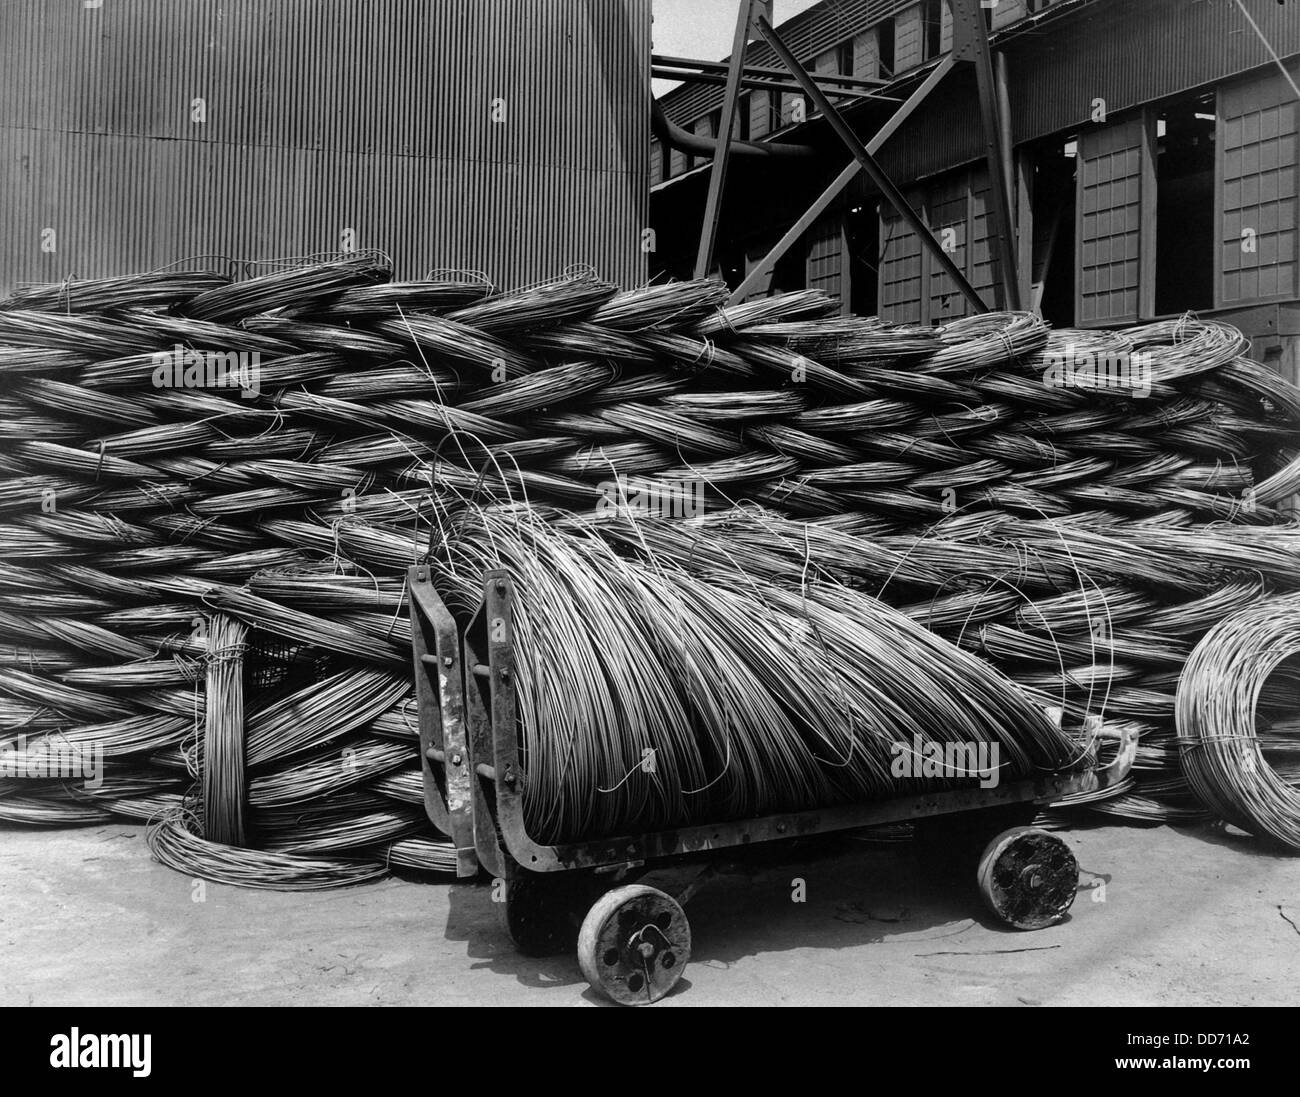 Wire rods, the raw material from which steel wire is drawn. Barbed wire was an essential defensive barricade used in the trench Stock Photo